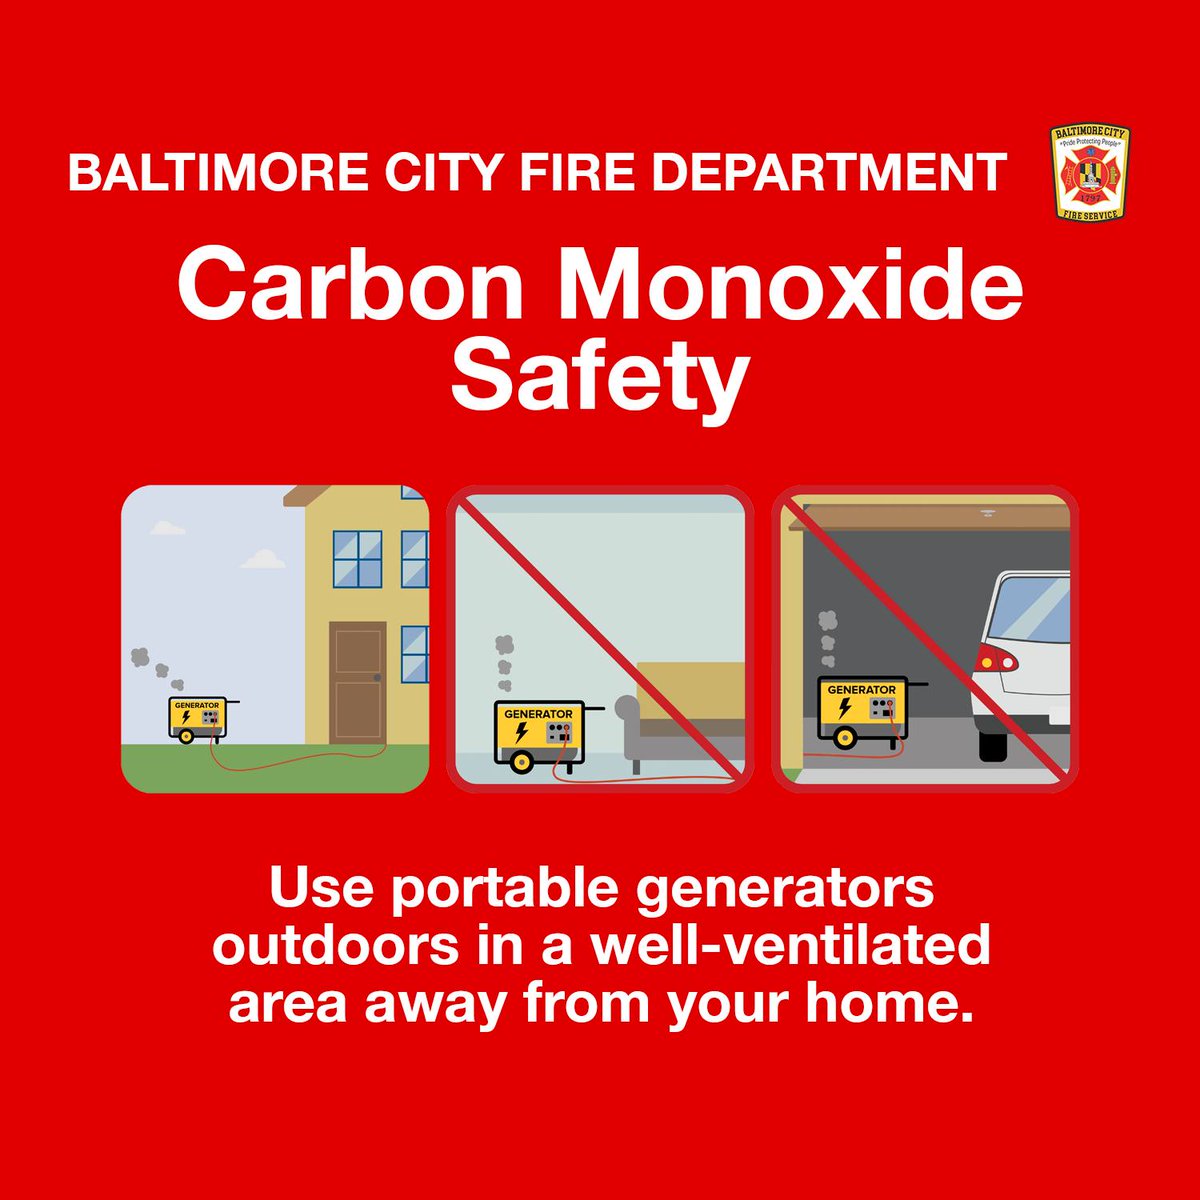 Ensuring your safety and that of your loved ones is paramount when it comes to using portable generators. Always remember to operate them outdoors in a well-ventilated area, keeping a safe distance from your home. This simple precaution can prevent the dangers of carbon monoxide